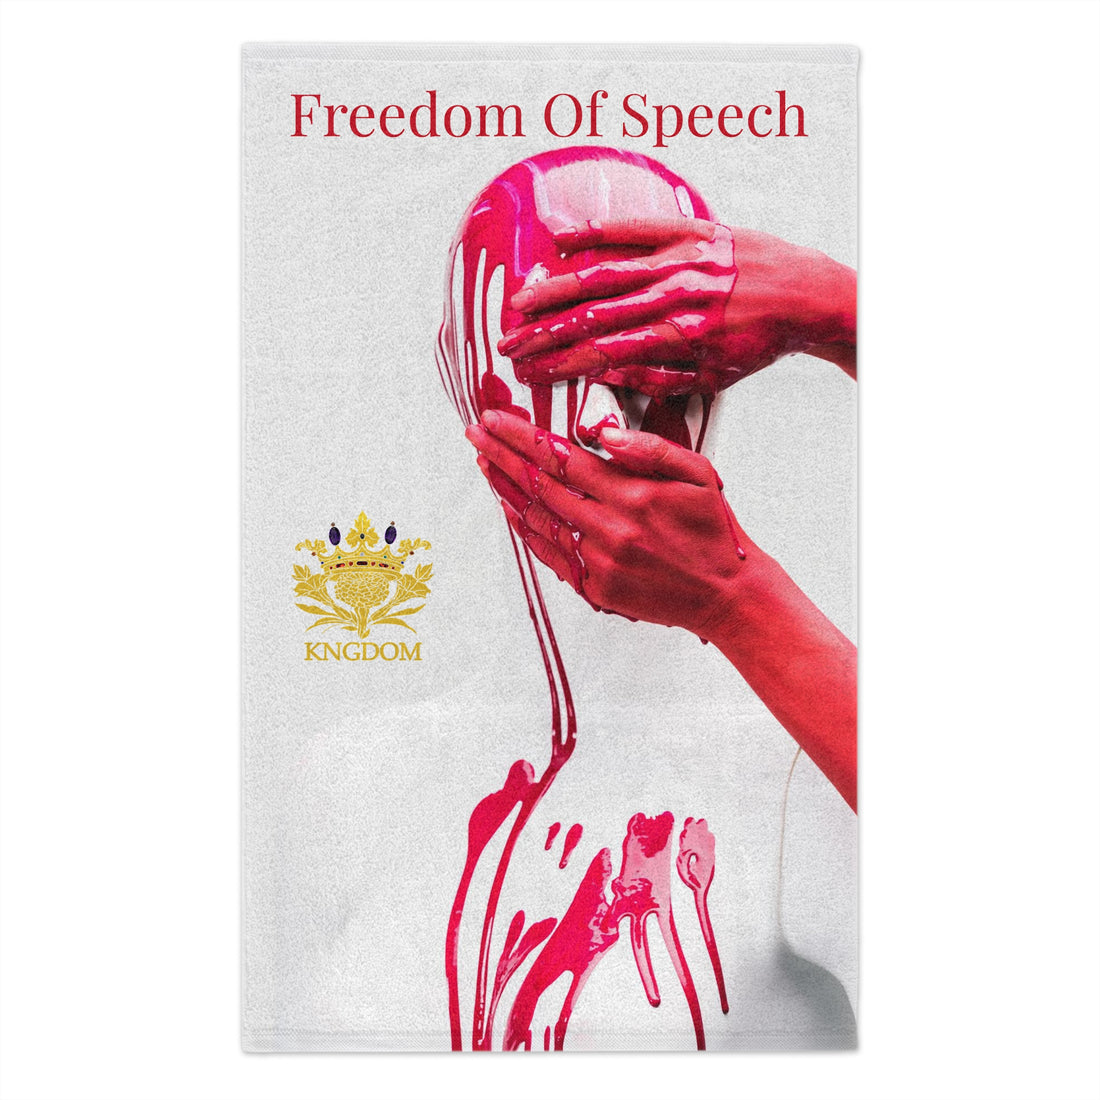 WE ARE AMERICA &quot;Freedom Of Speech&quot;(THE BLOOD OF THE MARTYRS) Rally Towel- &quot;Hand on Eyes &amp; Mouth&quot; Image W/Kngdom Logo